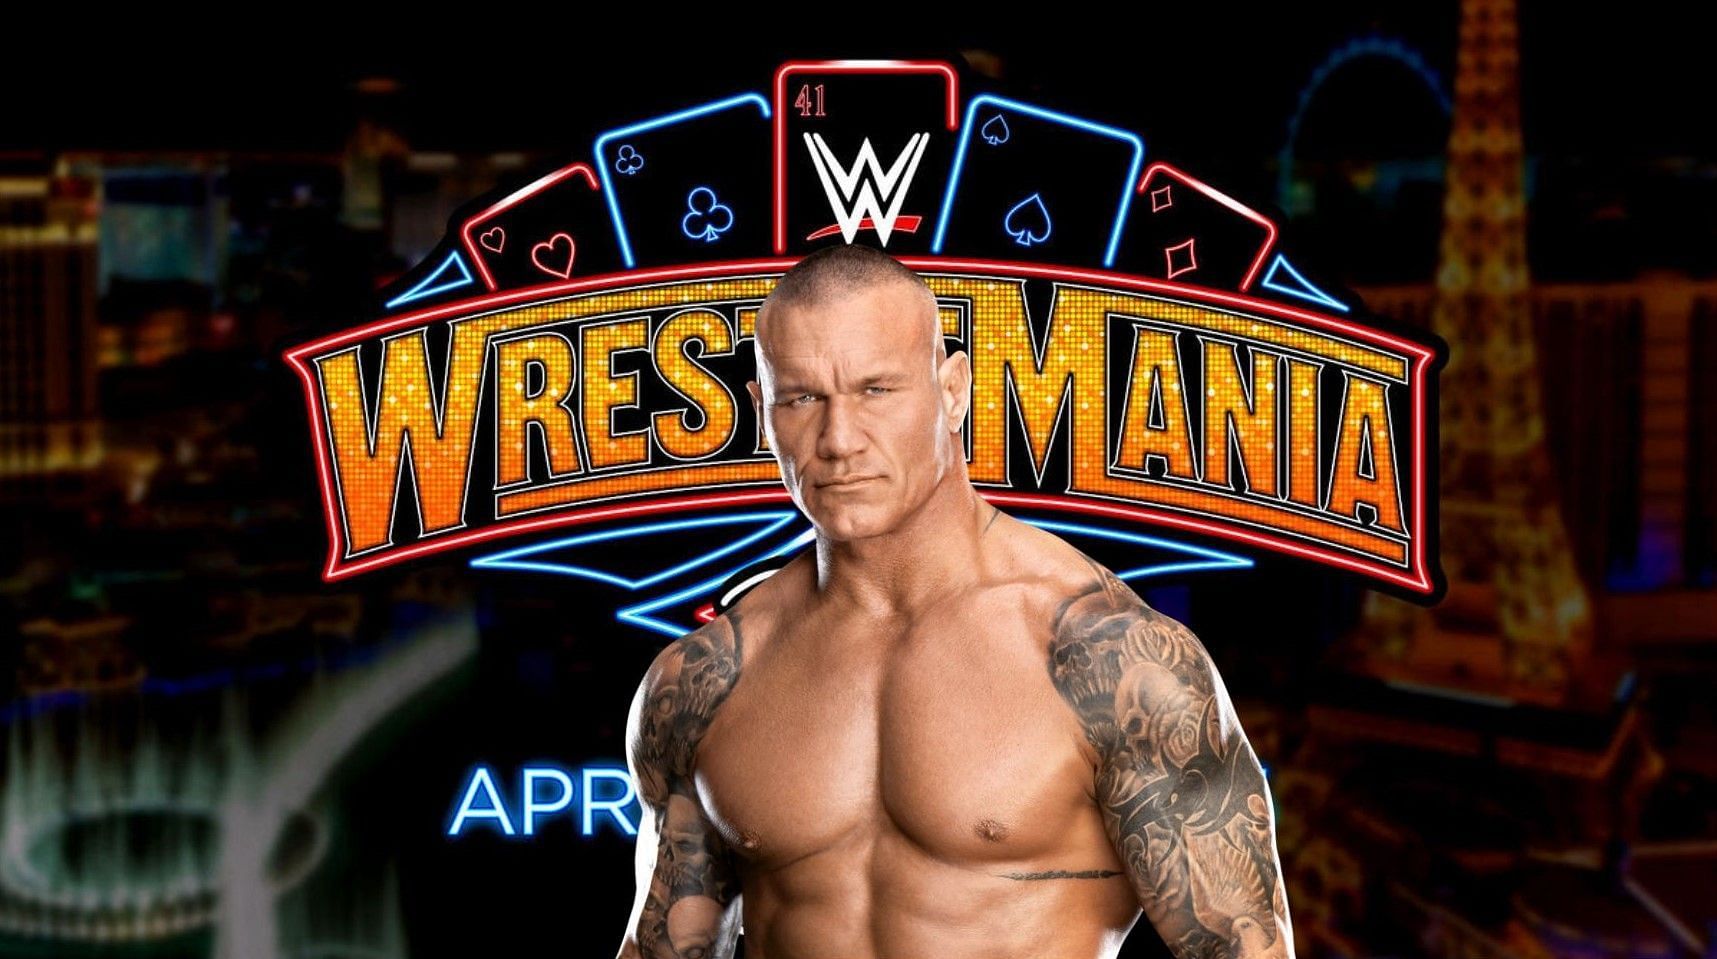 Randy Orton may have an opponent lined up for WrestleMania 41 (IMAGE SOURCE: WWE)